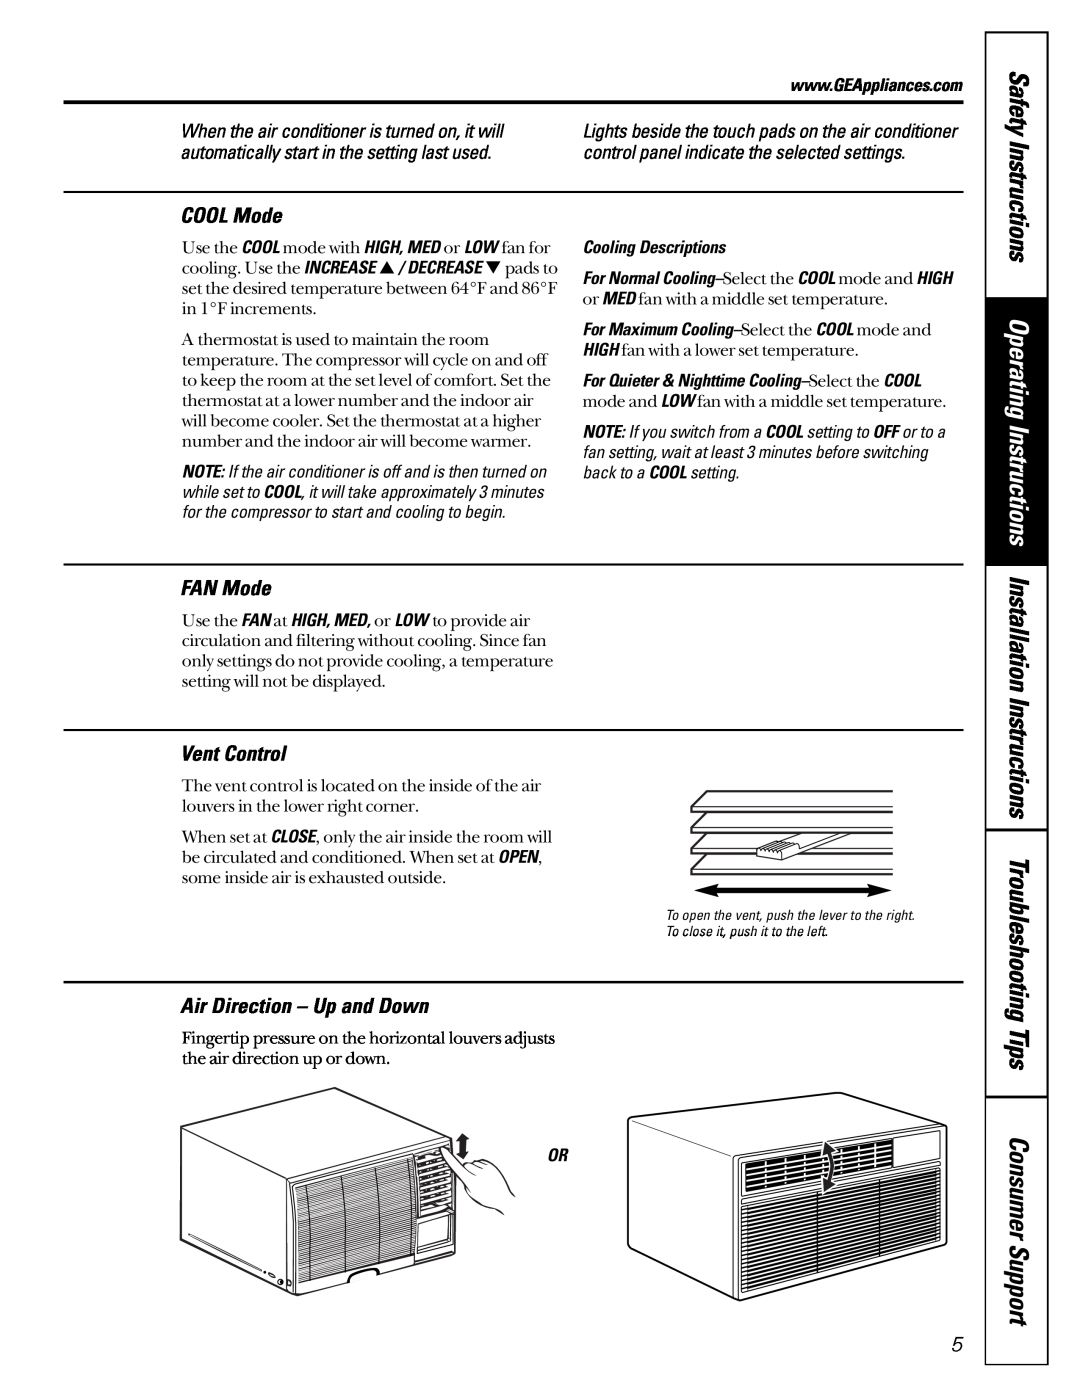 GE ASM16 Operating Instructions, COOL Mode, FAN Mode, Vent Control, Air Direction - Up and Down, Cooling Descriptions 